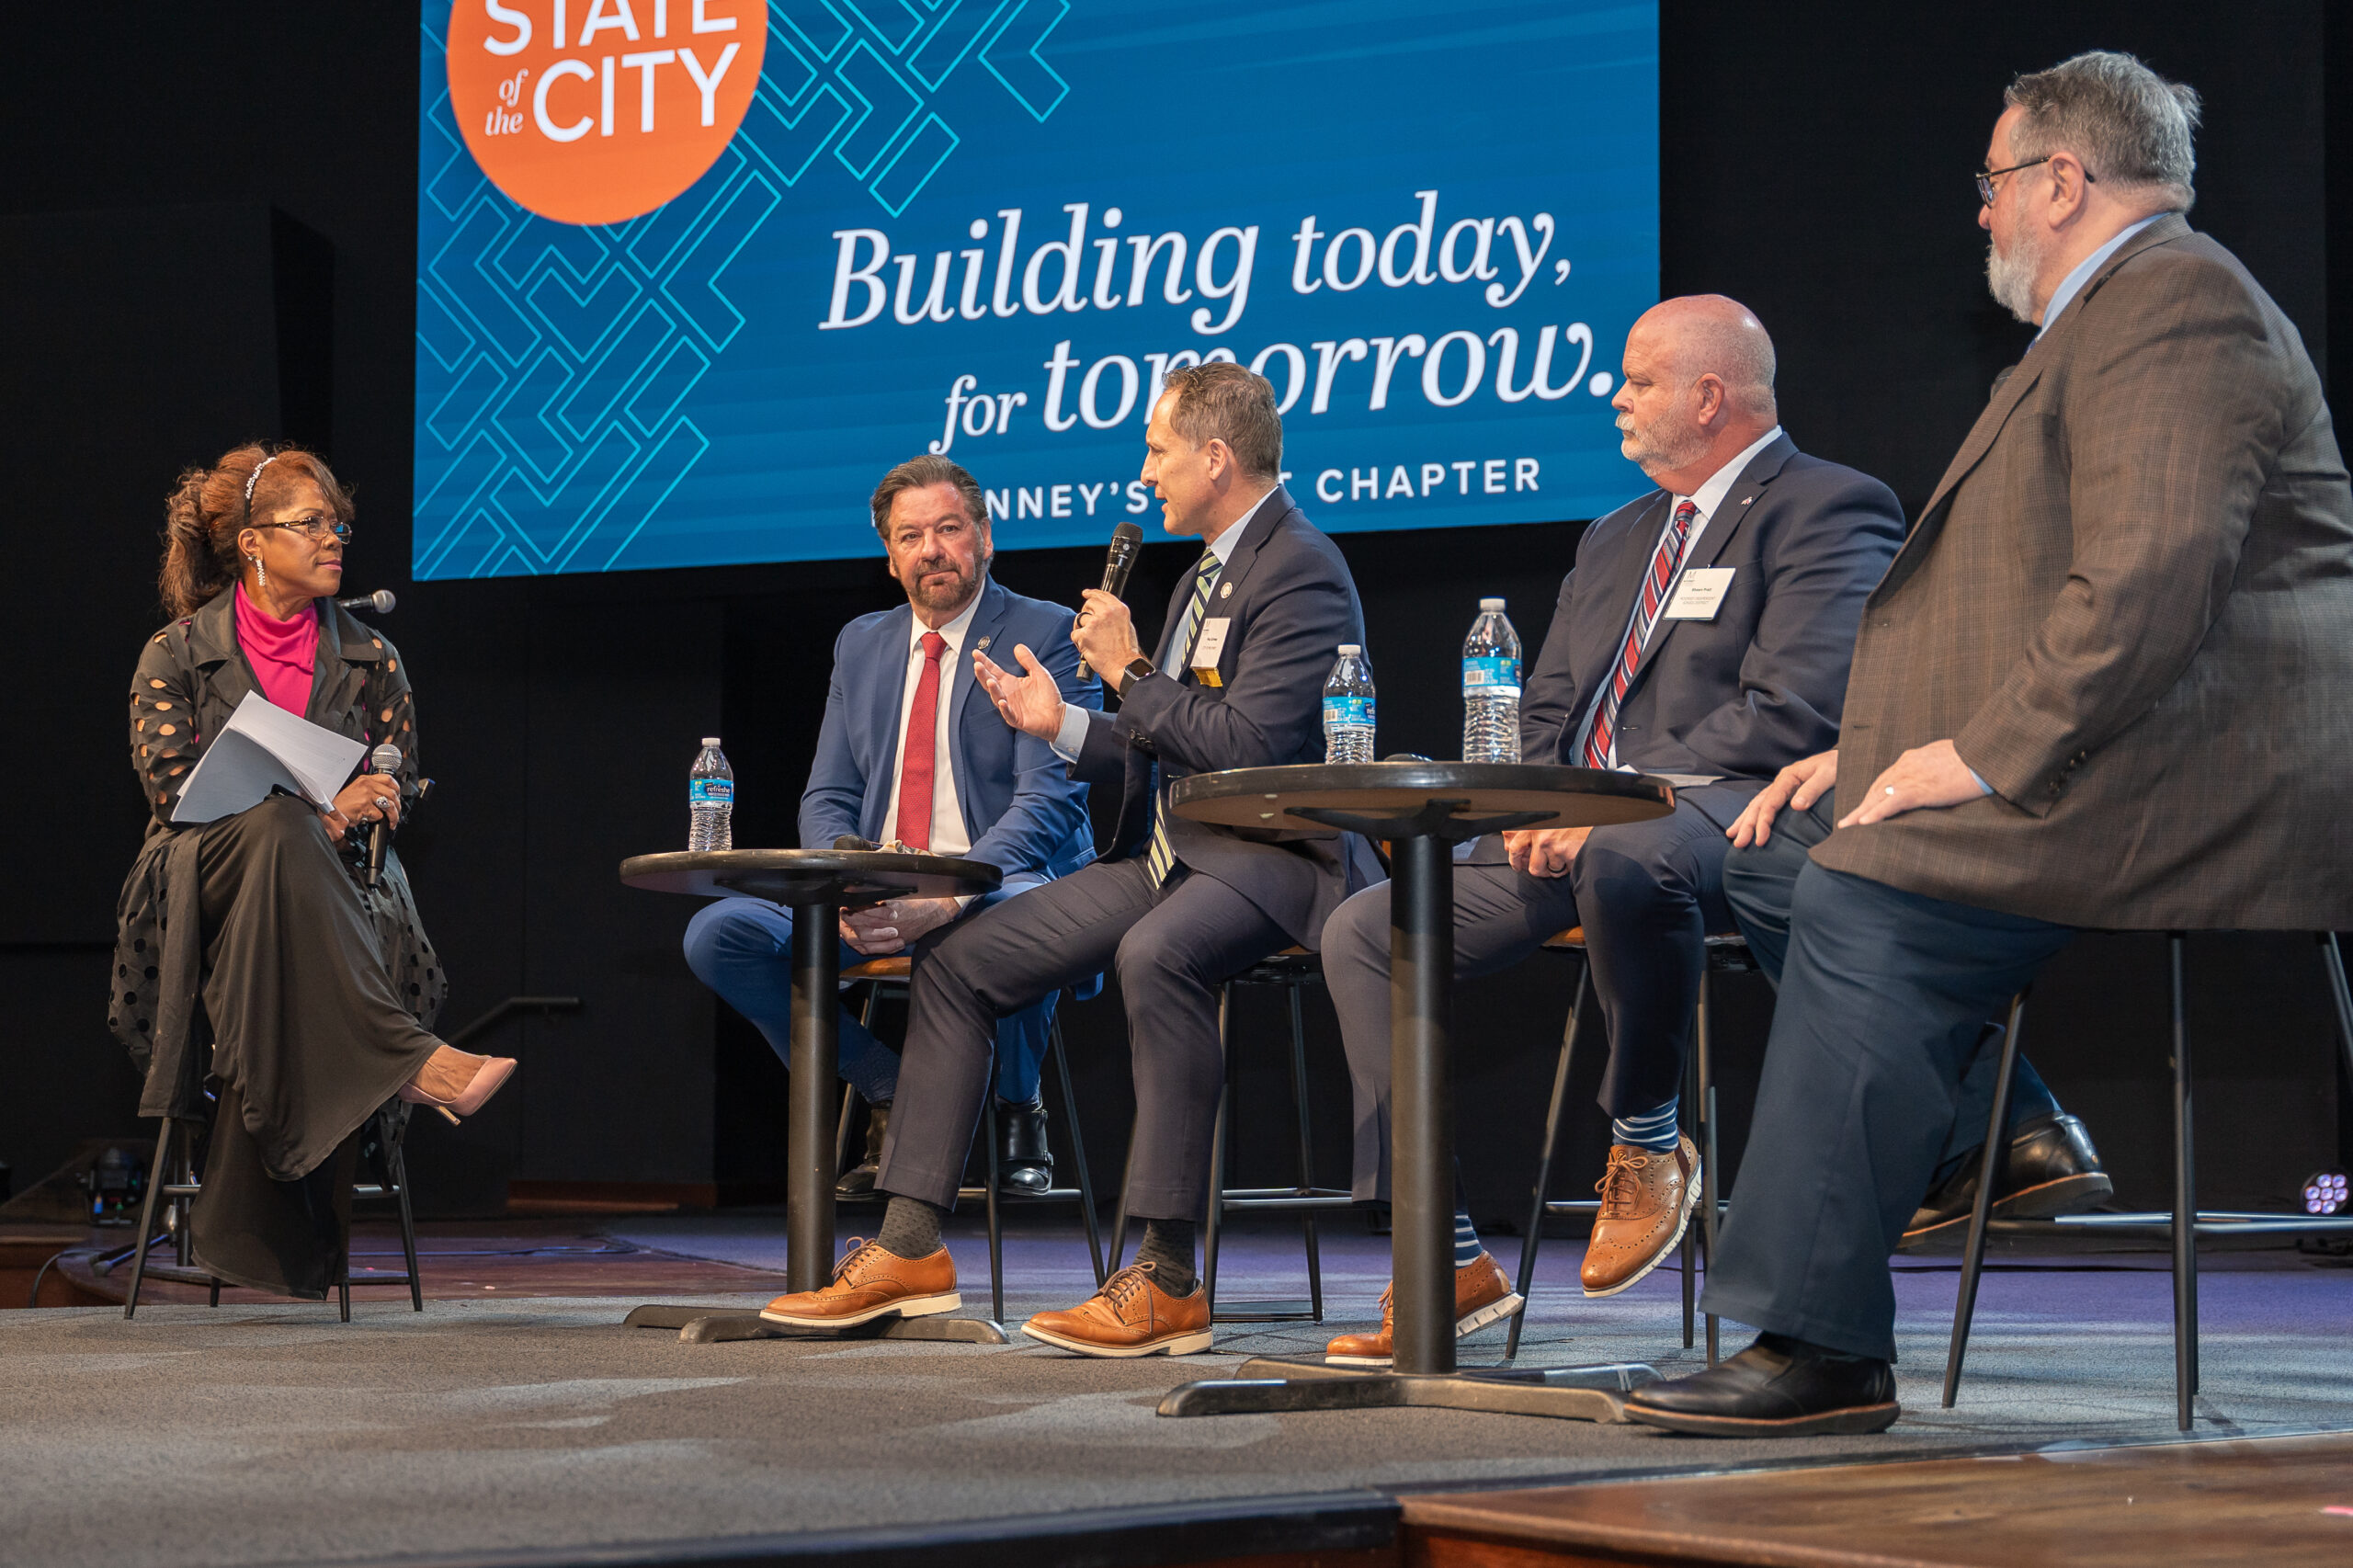 State of the City Event Showcases Community Collaboration and Vision for the Future